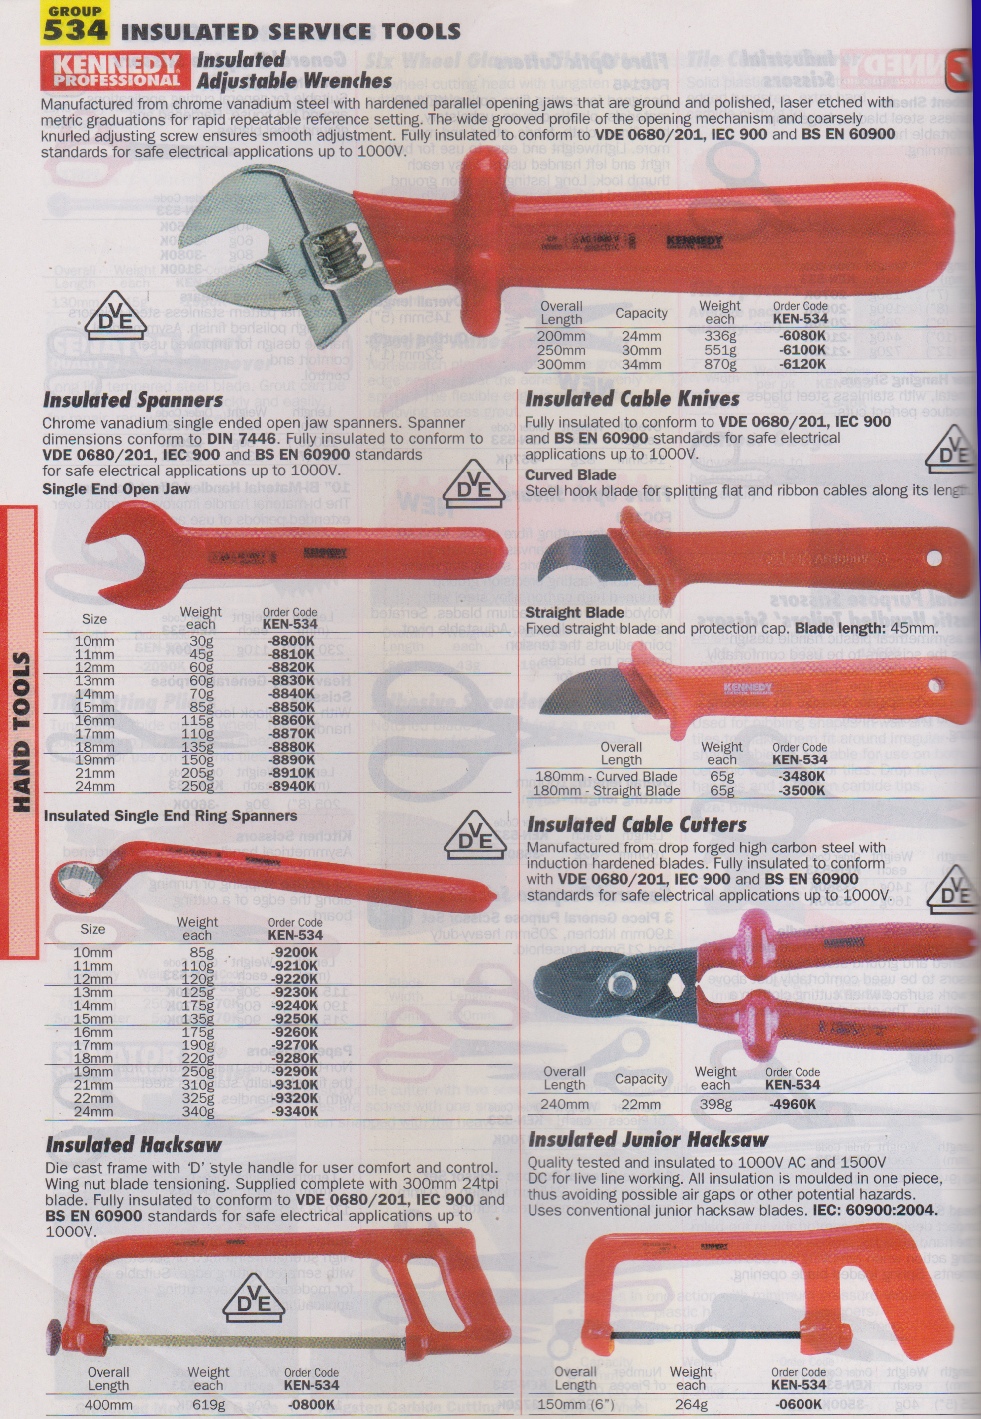 insulated service tools, chennai, insulated adjustable wrenches,insulated spanners, insulated cable knives,insulated hacksaw,insulated junior hacksaw,insulated cable cutters